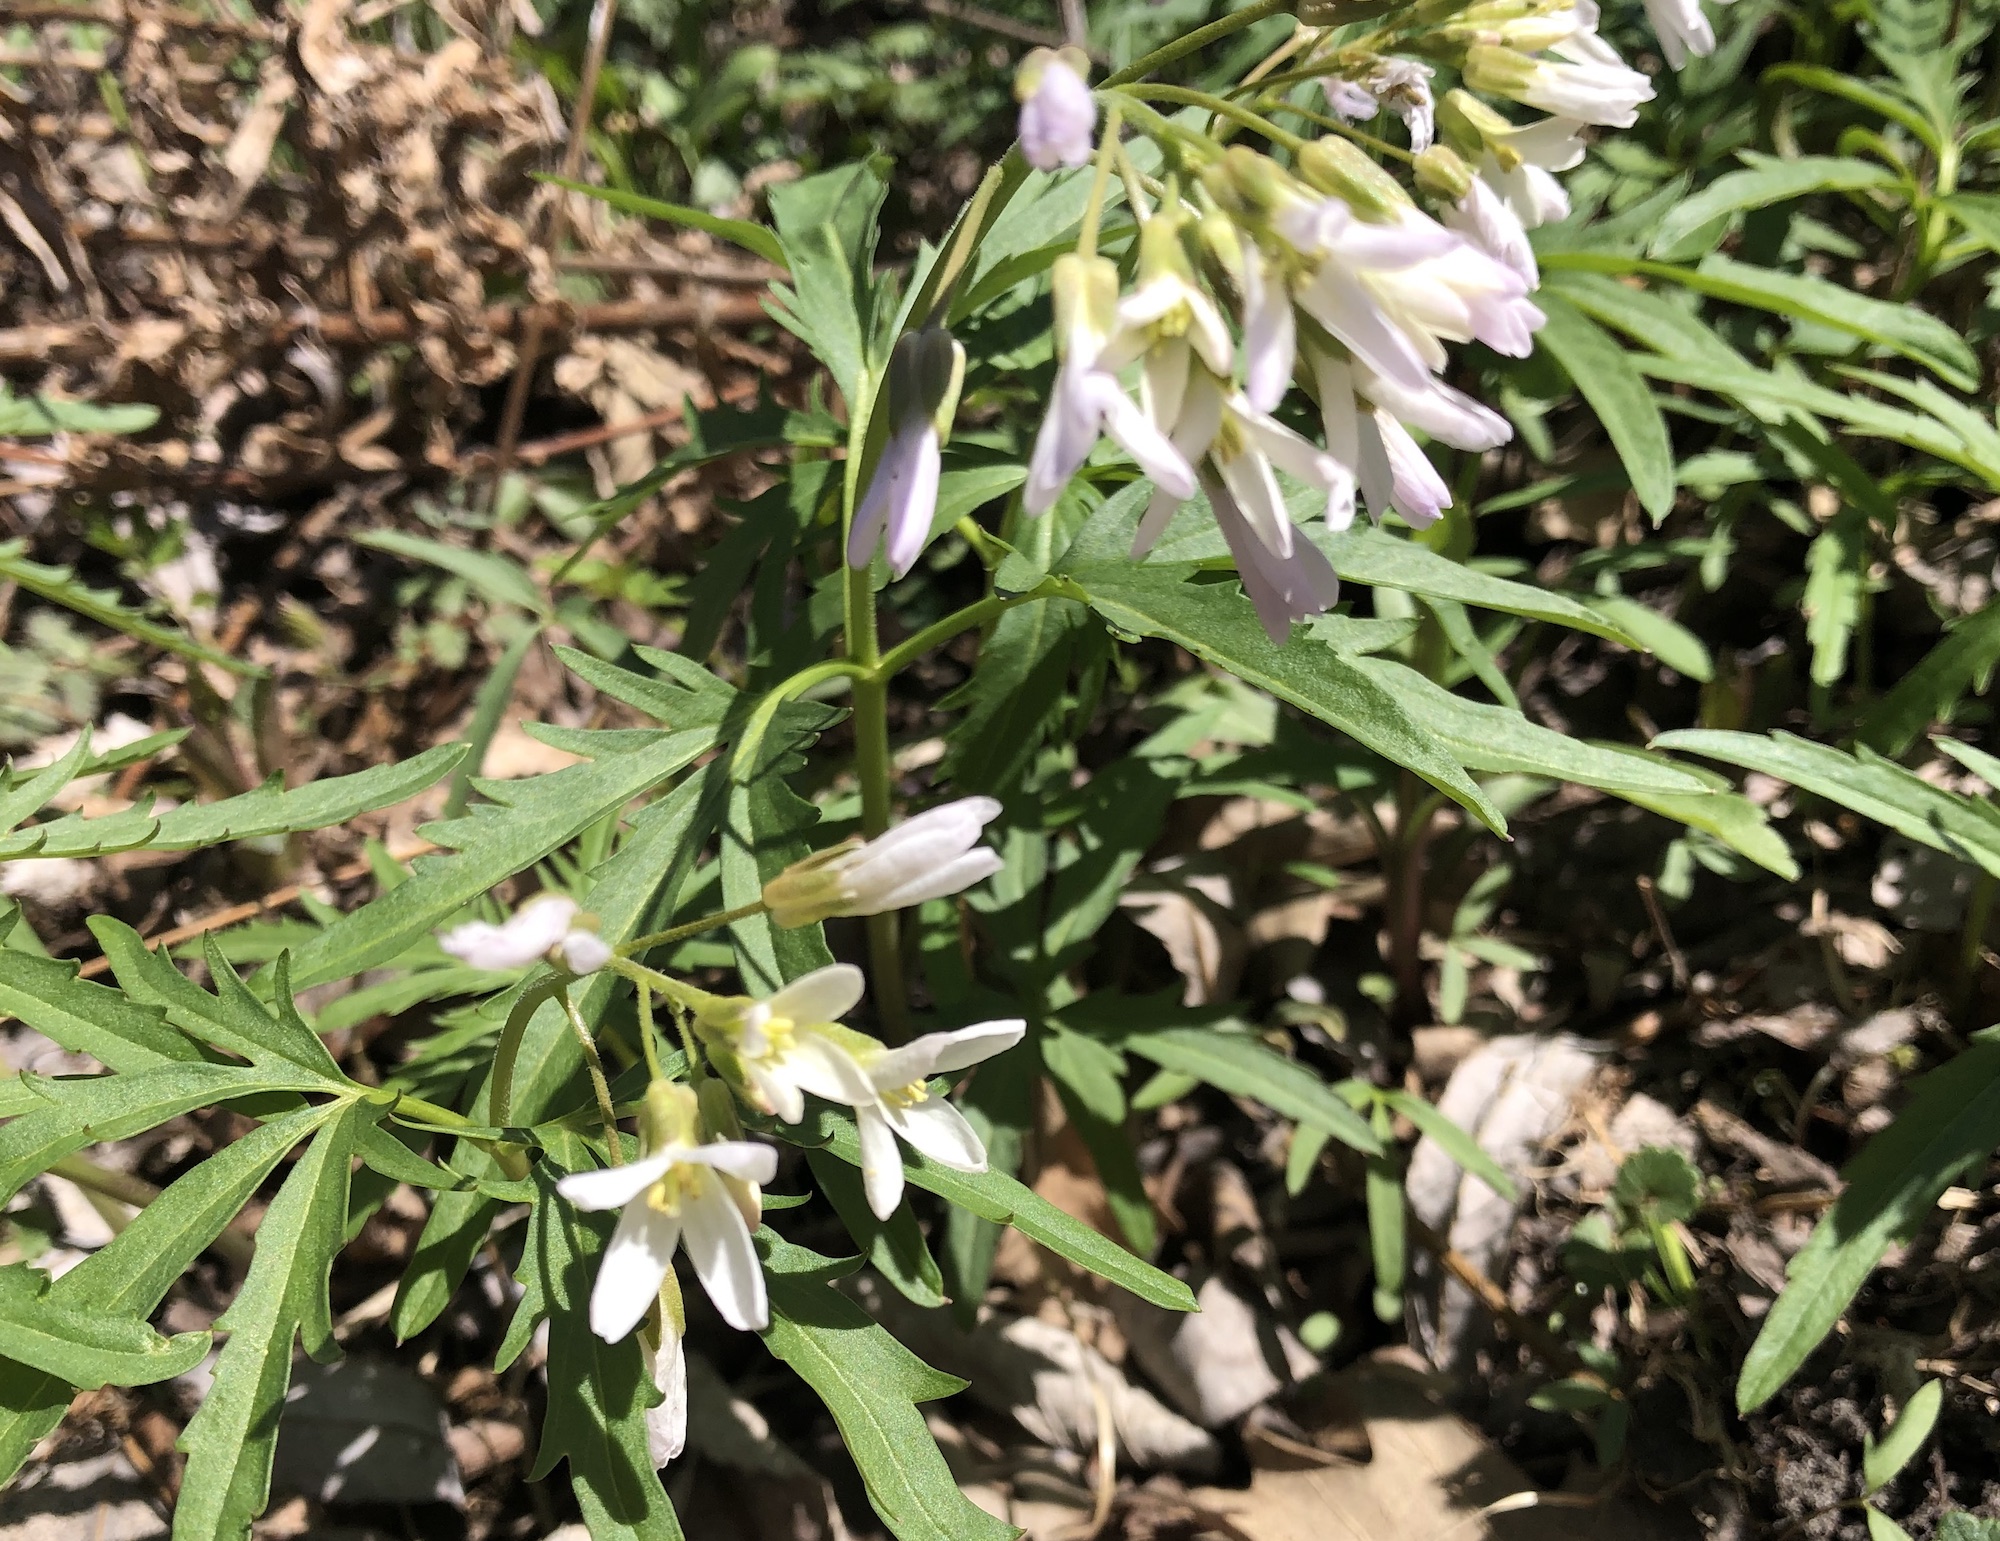 Cutleaf Toothwort near Council Ring Spring on April 15, 2019.